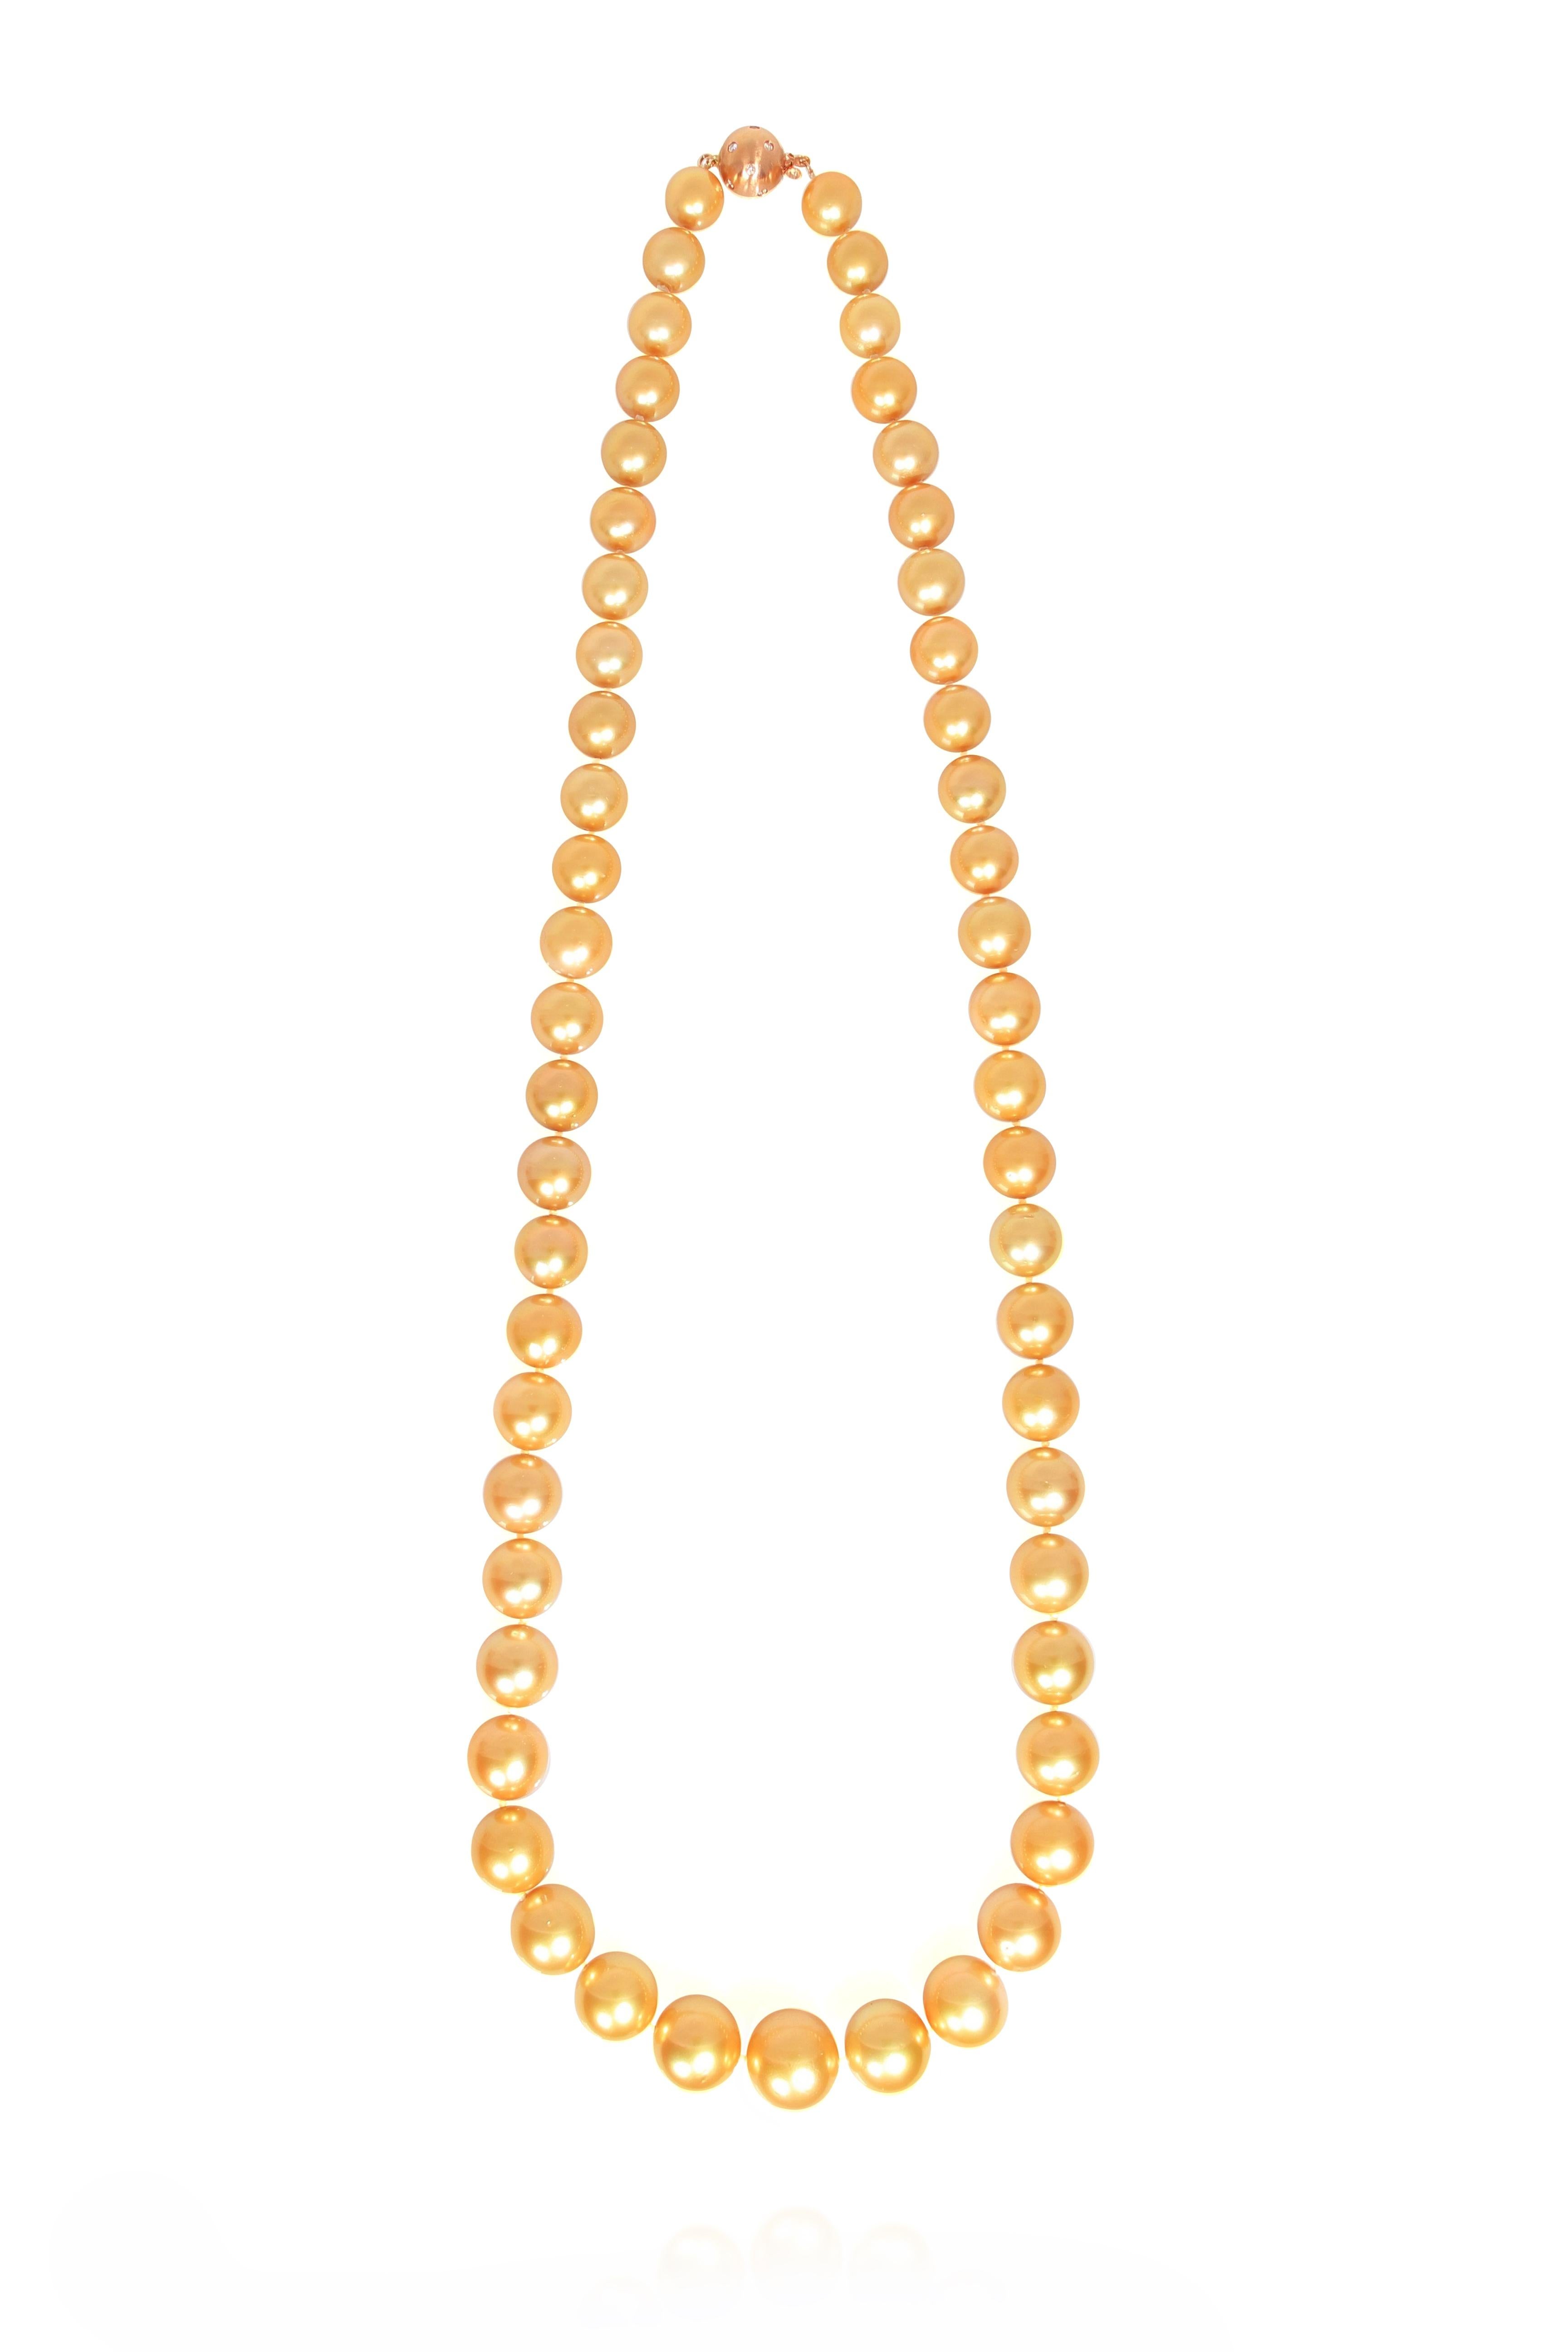 Contemporary Golden South Sea Pearl Necklace with 18K Gold Clasp with Diamonds For Sale